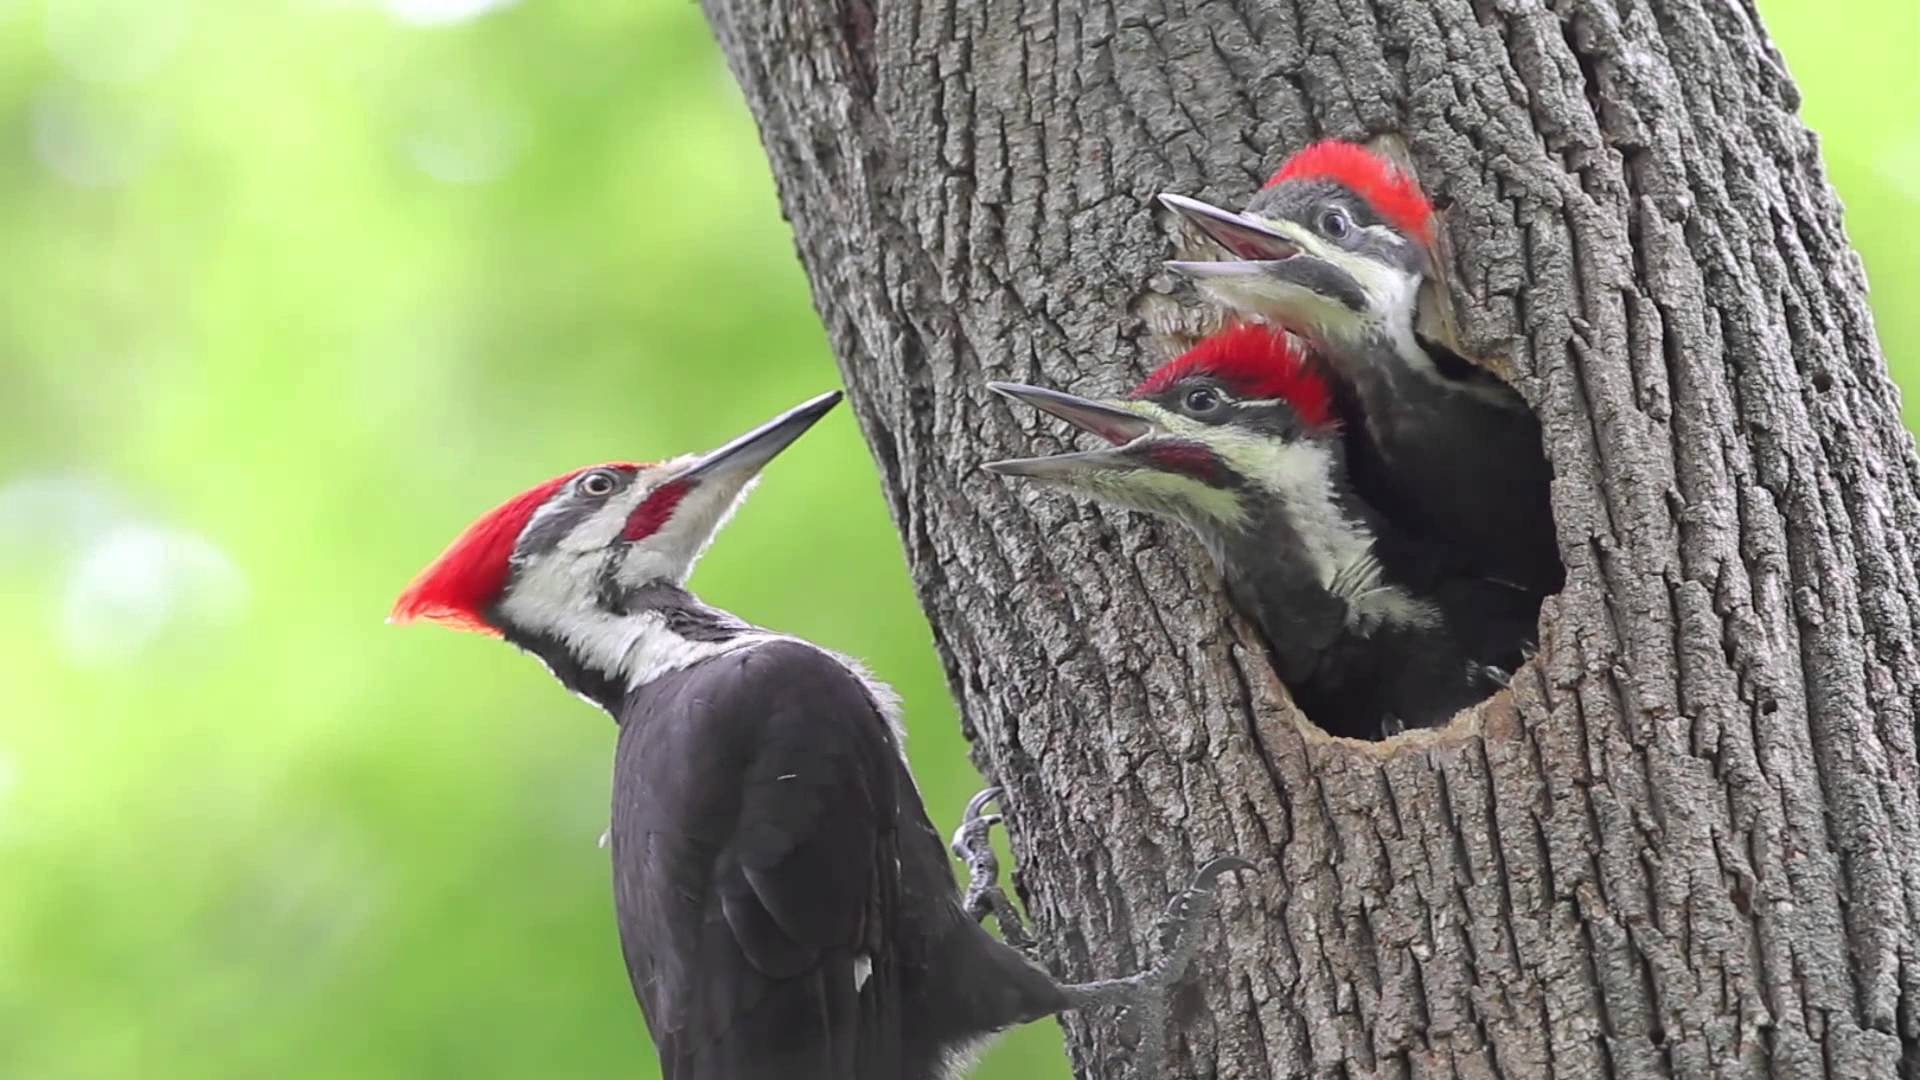 Pileated Woodpecker Chicks At the Nest - YouTube